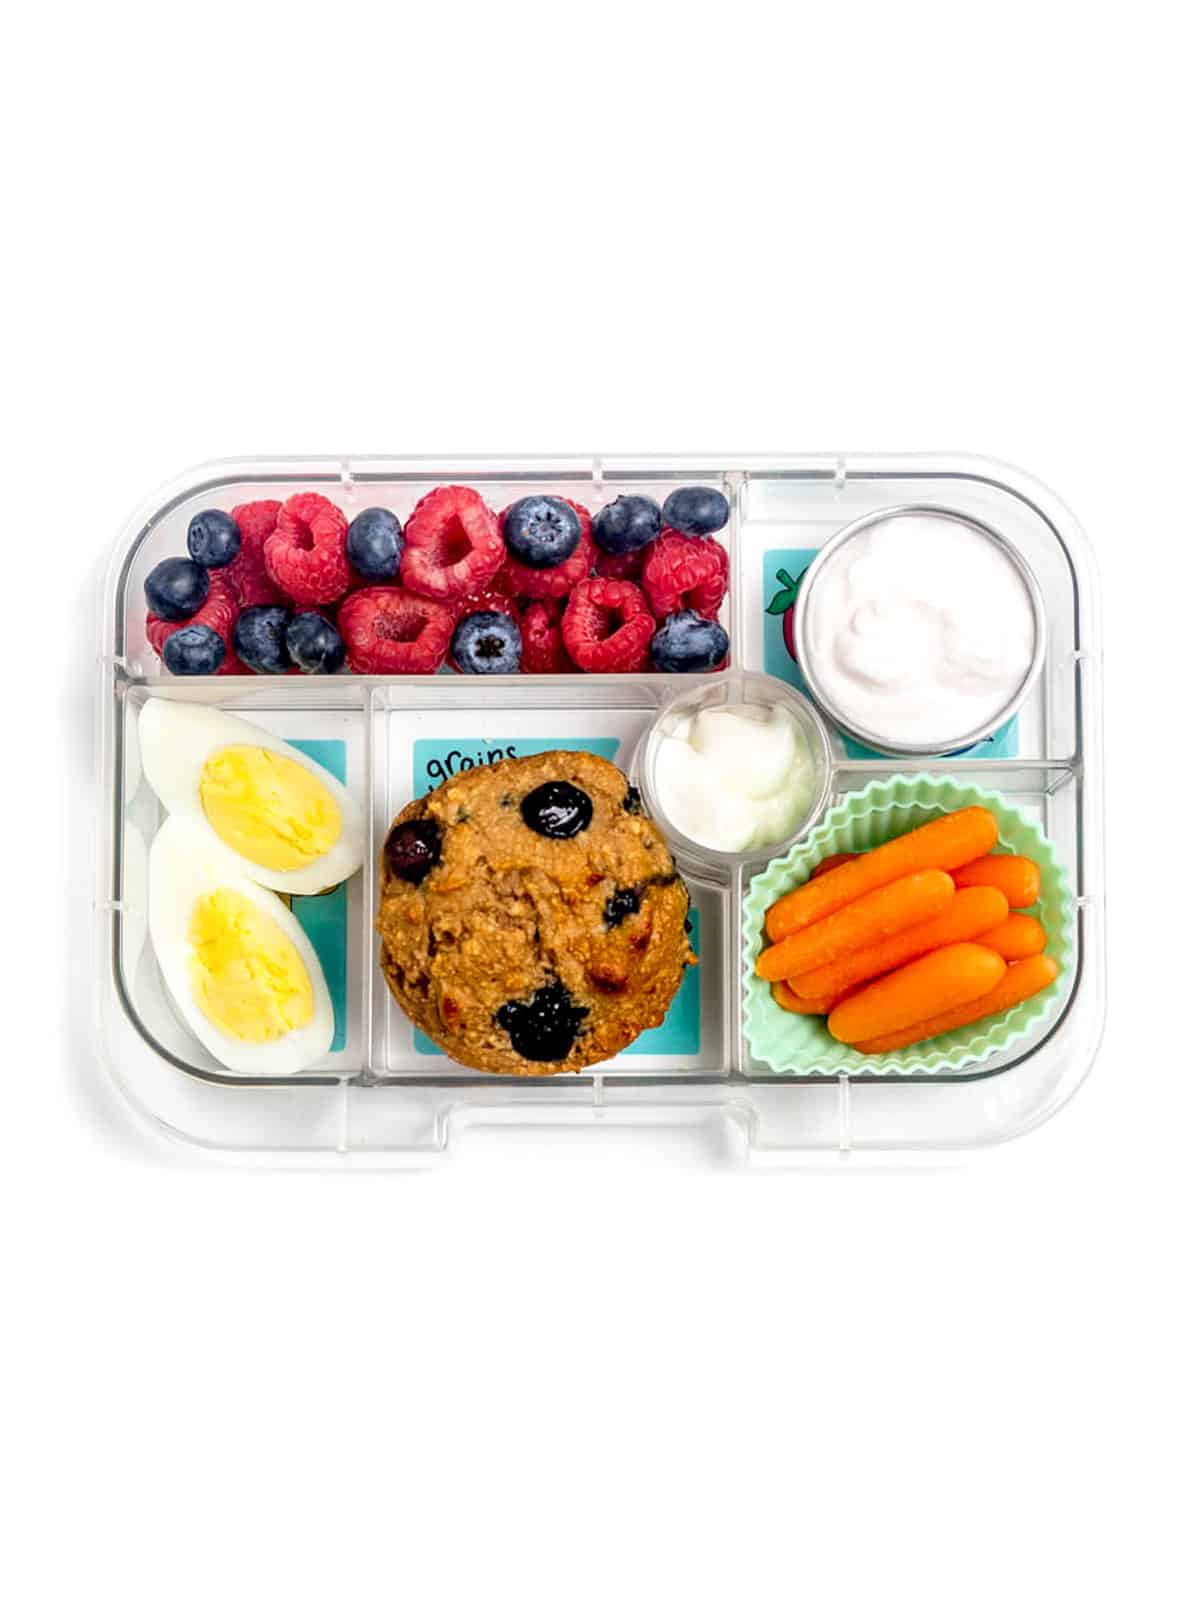 A lunch box with a hard boiled egg, blueberries protein muffin, yogurt, mixed berries, and carrot sticks with dip.